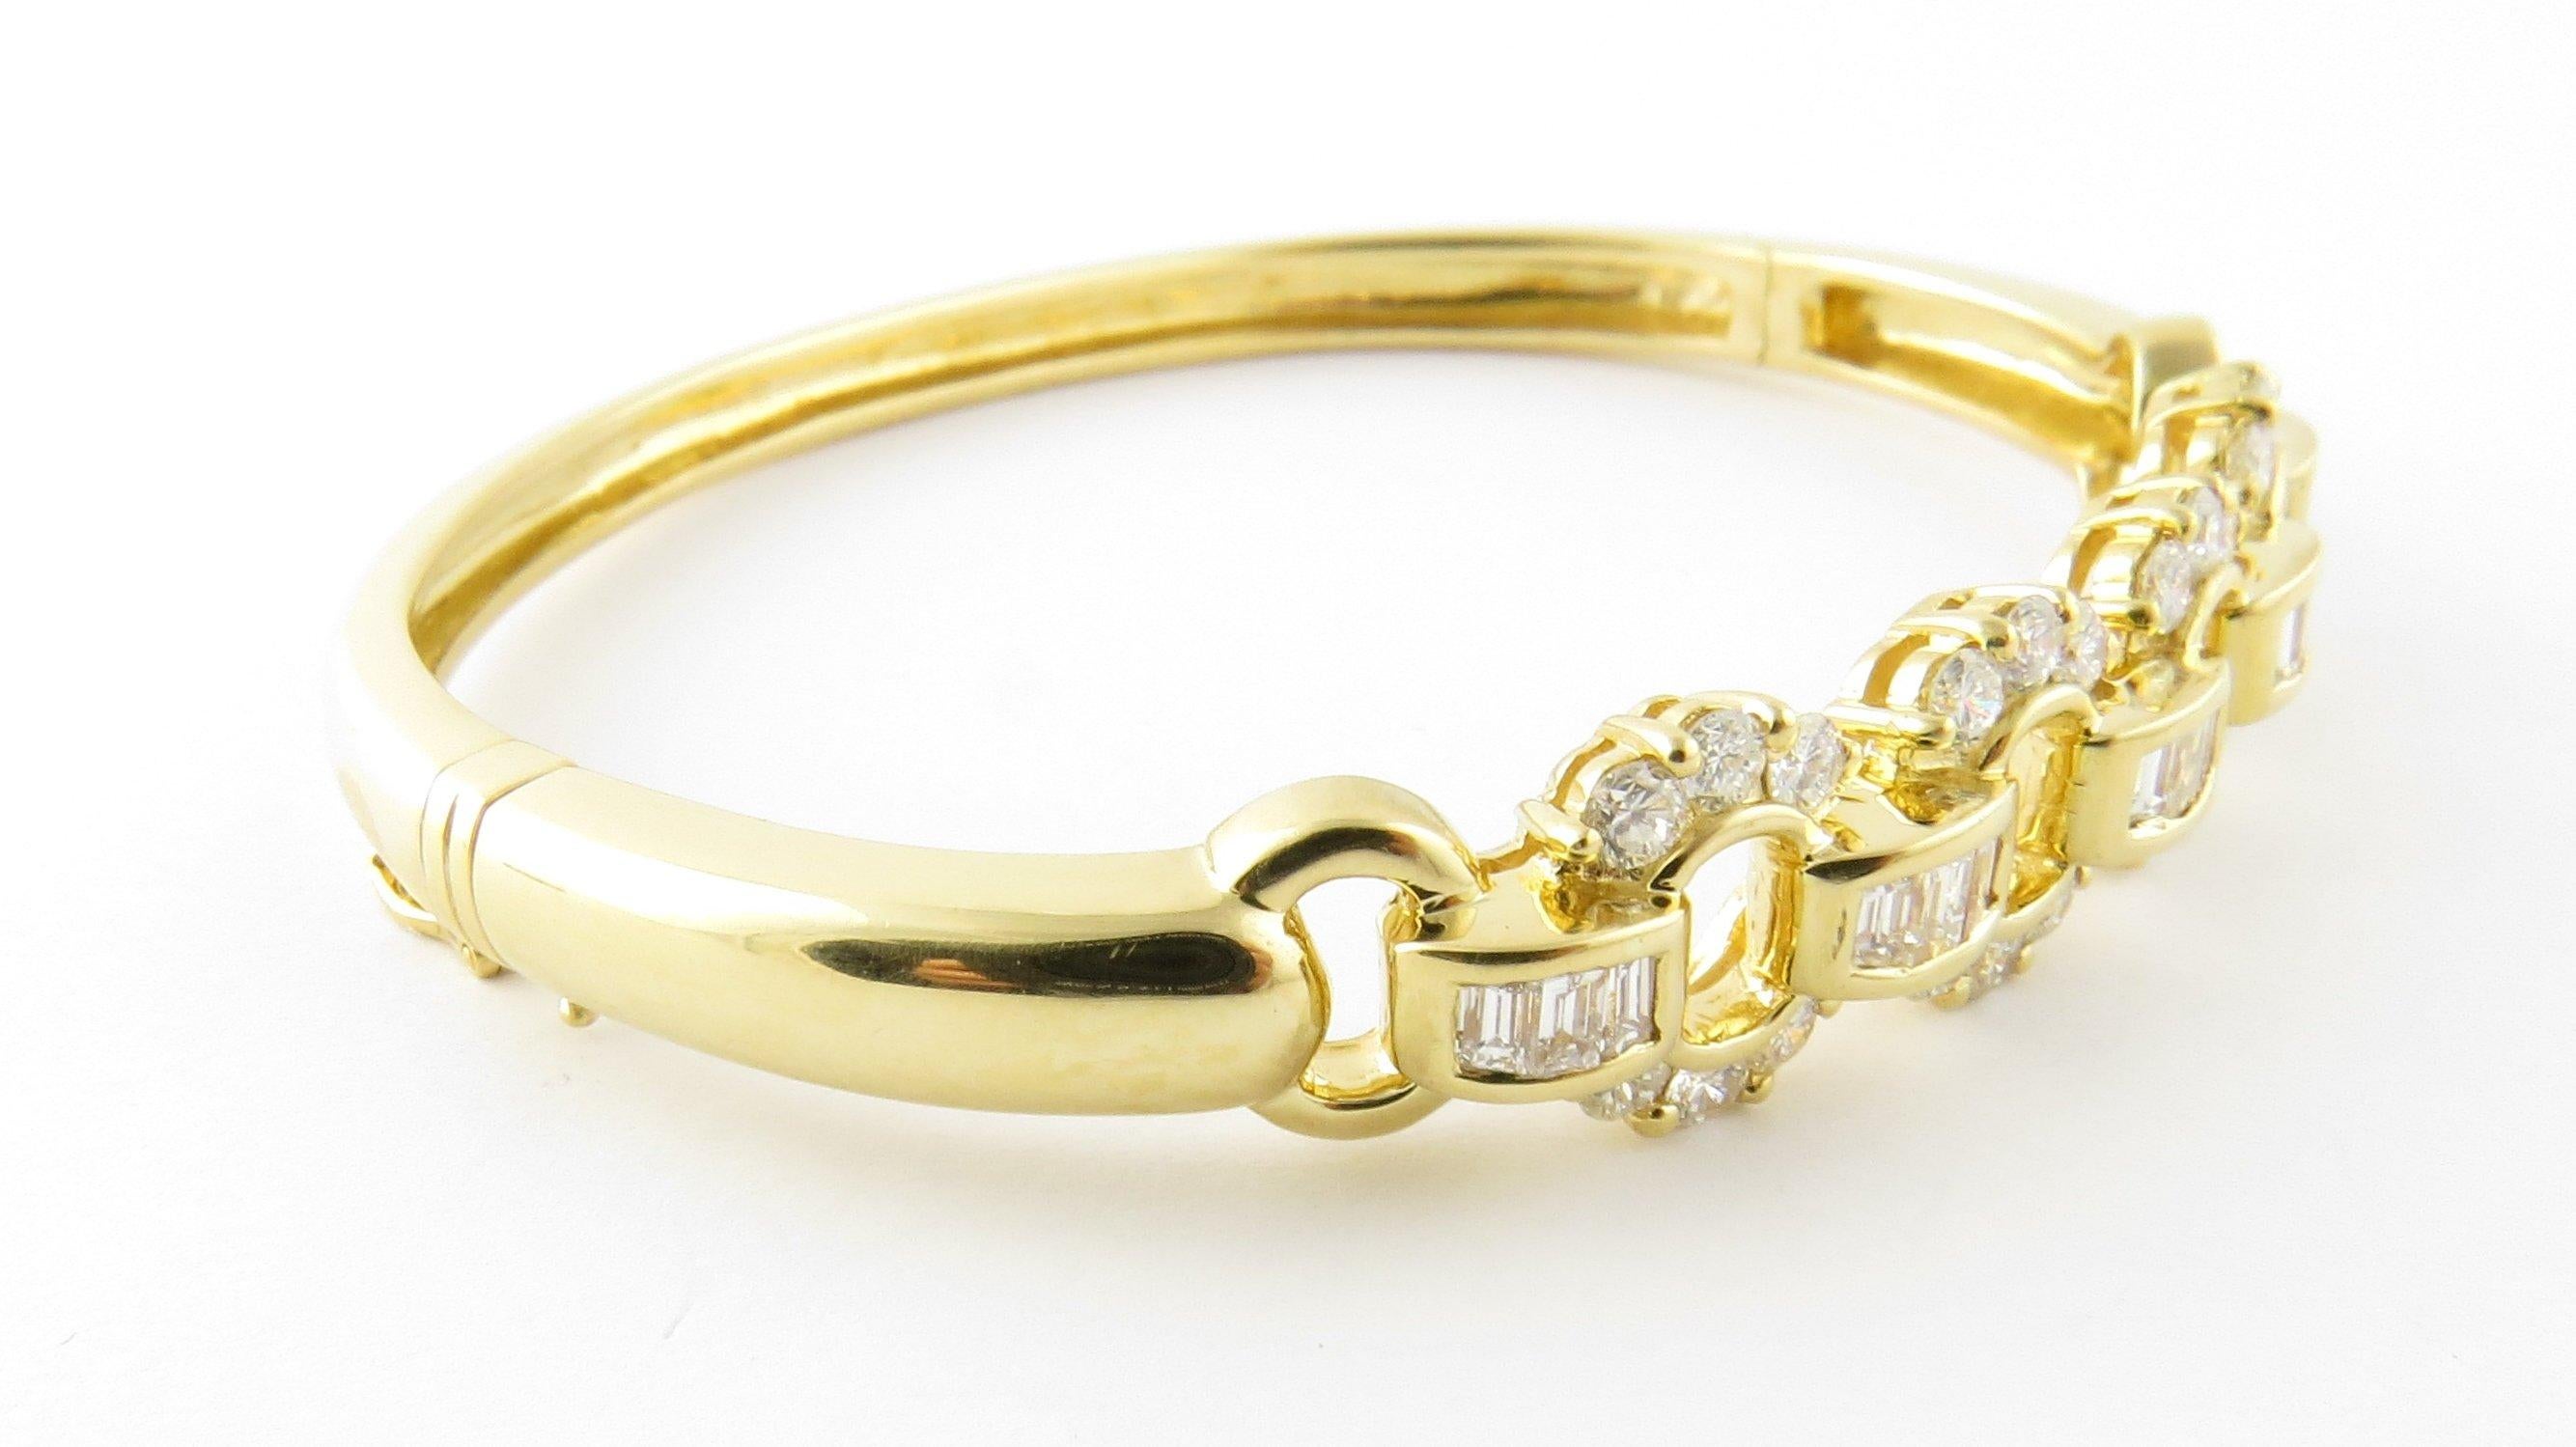 Vintage 18 Karat Yellow Gold and Diamond Bangle Bracelet- This stunning hinged bangle bracelet features 24 round brilliant cut diamonds (.04 ct. each) and 15 baguette diamonds (.65 ct. twt.) set in polished 18K yellow gold. Width at widest point: 11